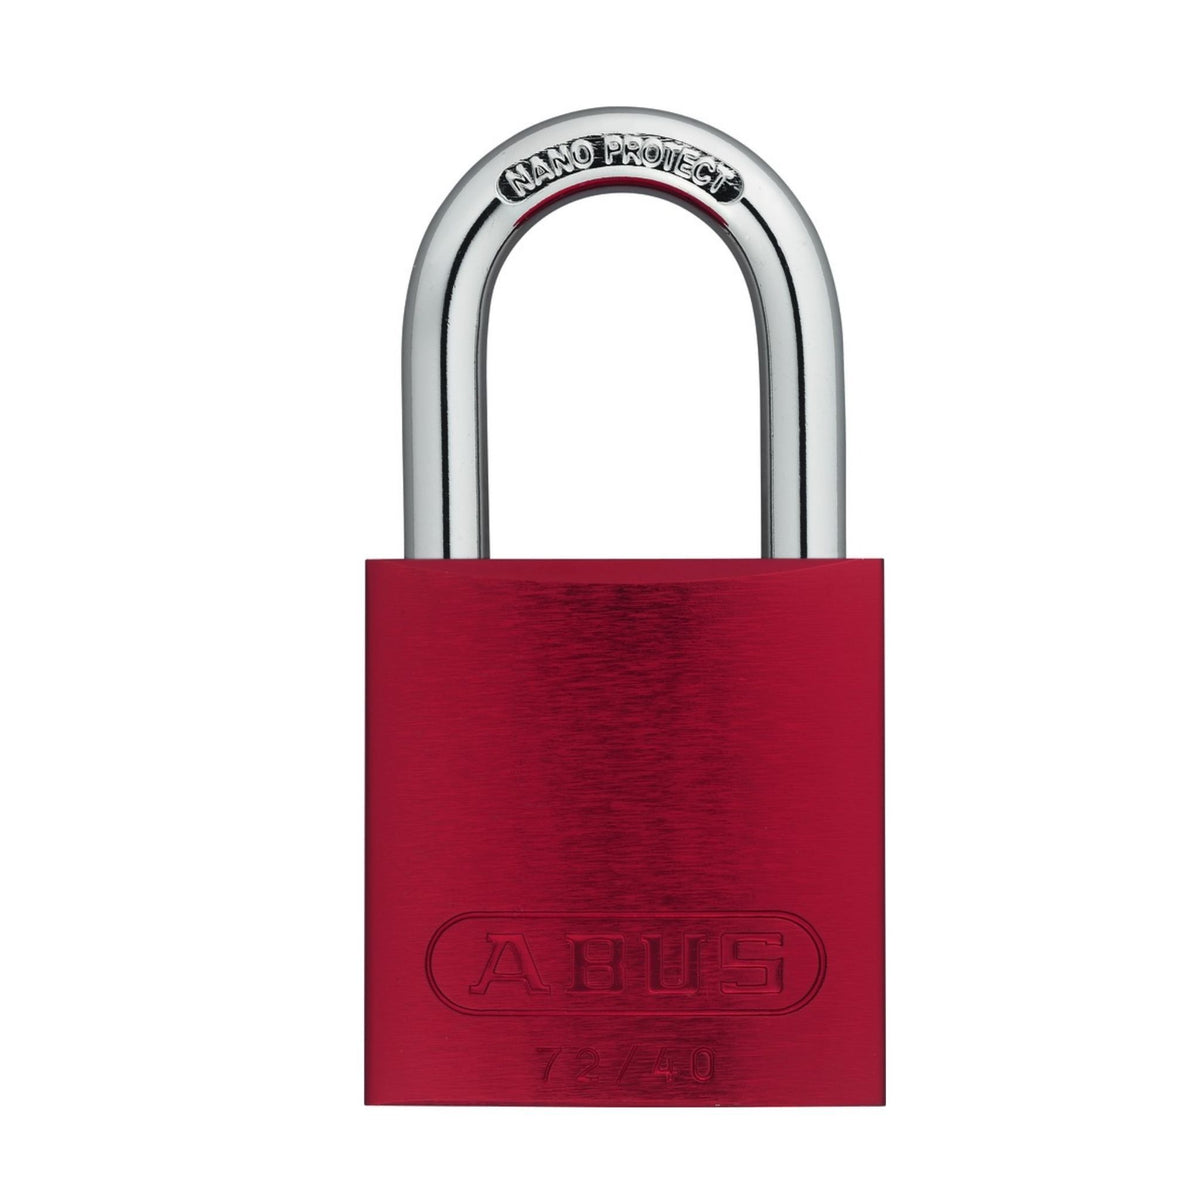 Abus 72/40 KA Red Titalium Safety Padlock with 1-Inch Shackle - The Lock Source 